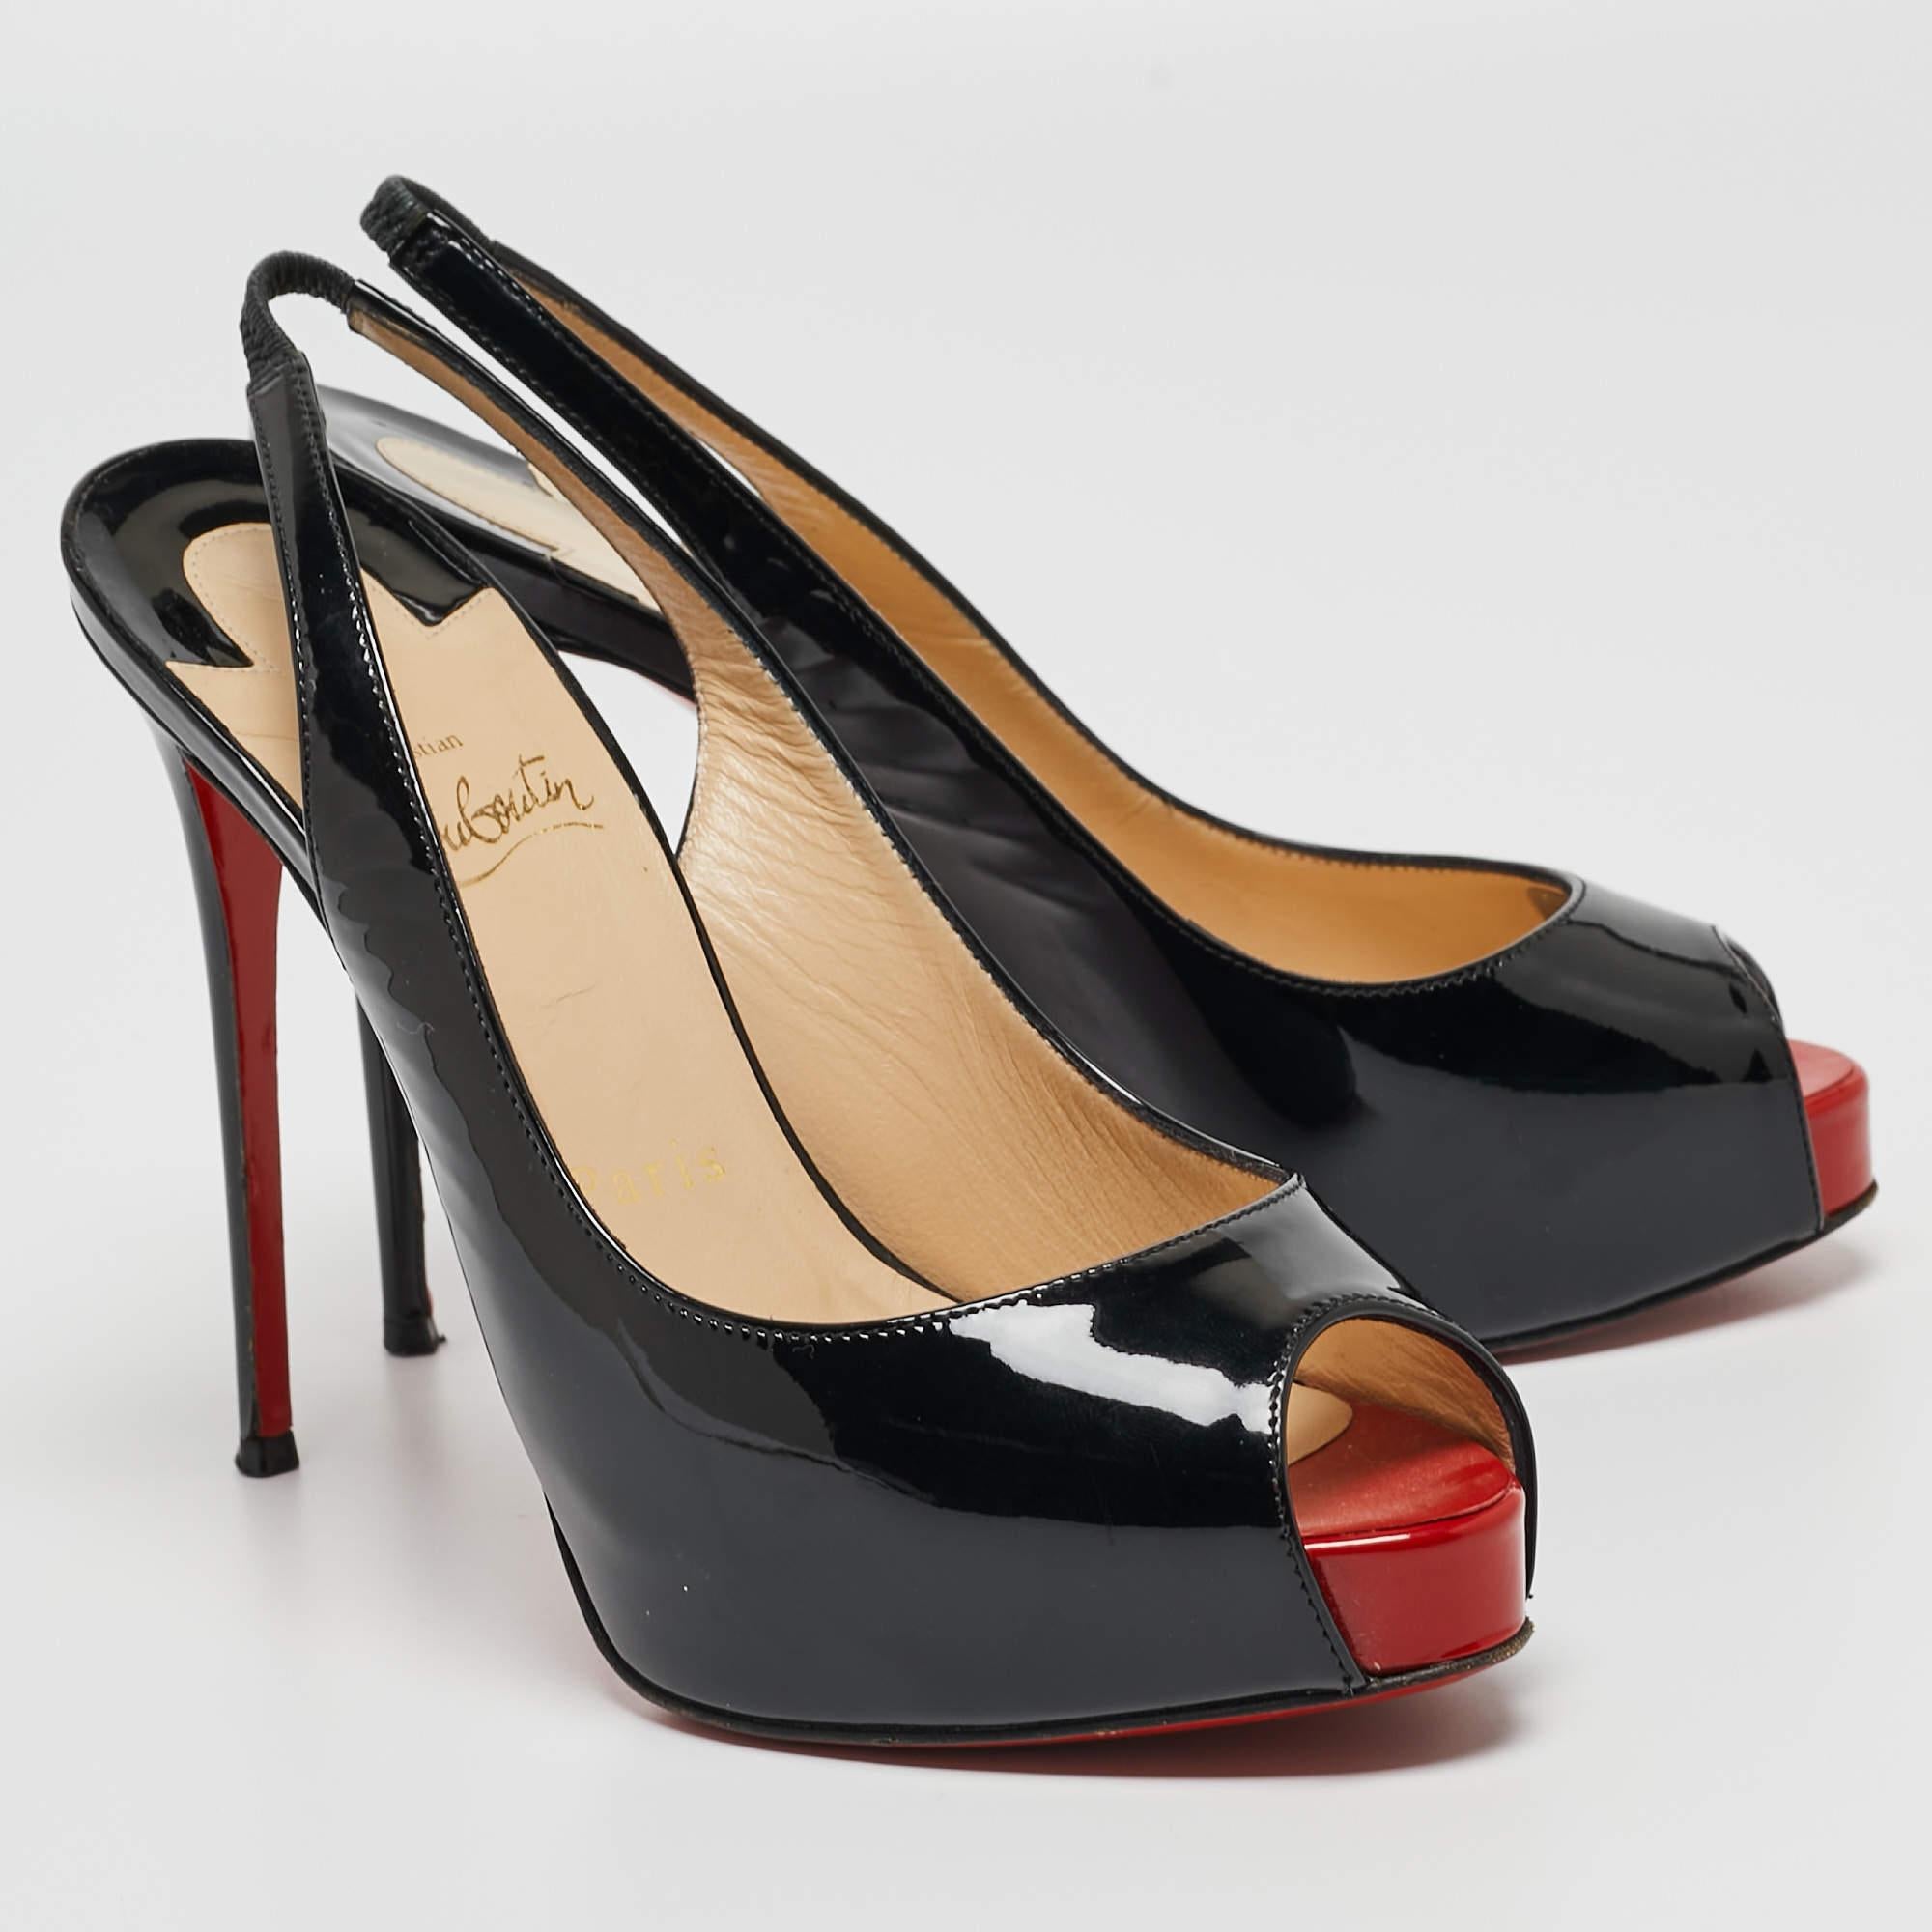 Christian Louboutin Black Patent Private Number Sandals Size 36 In Good Condition For Sale In Dubai, Al Qouz 2